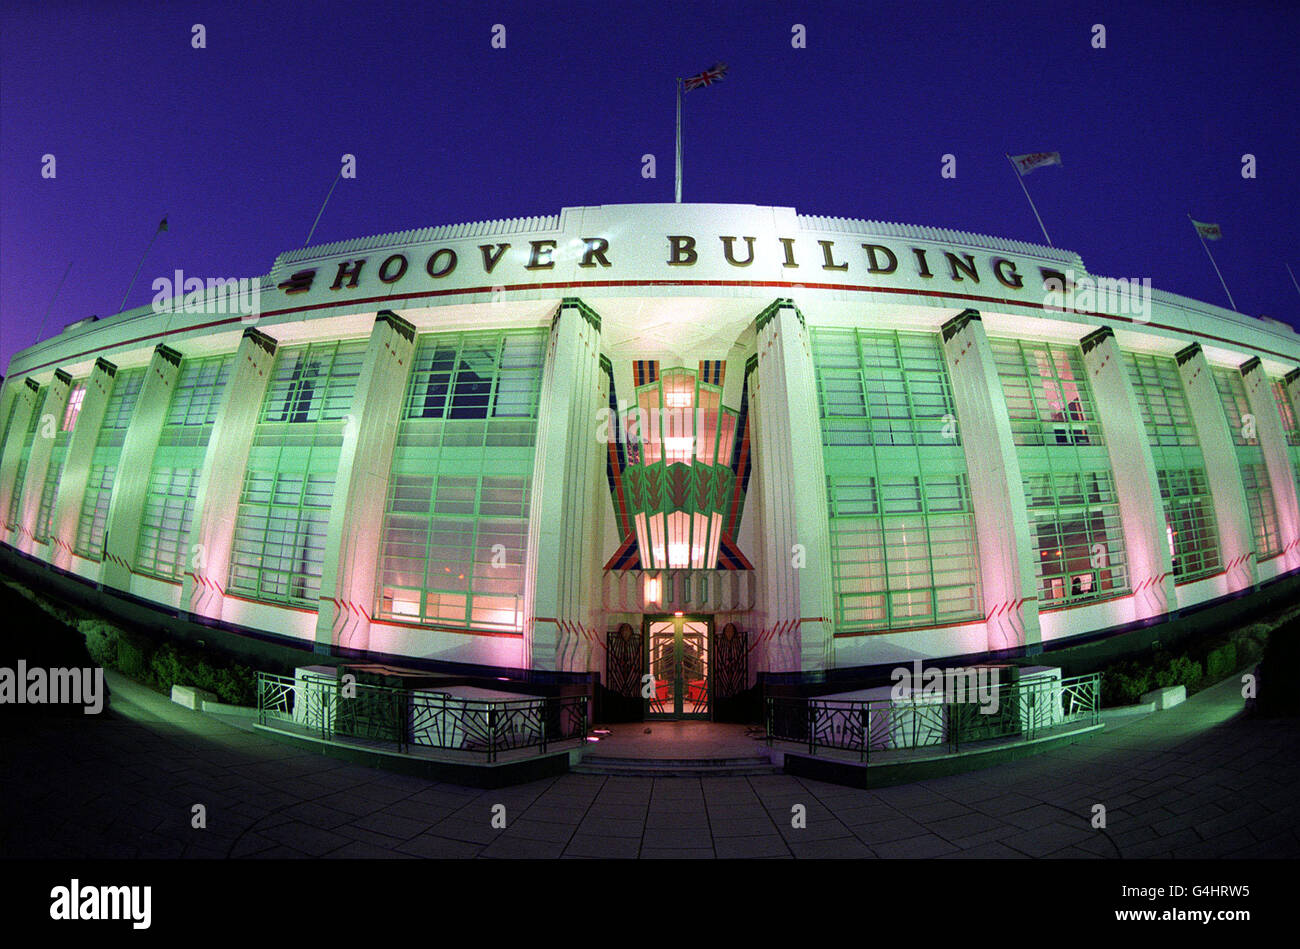 Night scenes of London's Landmarks and Lights. The Hoover Building, which is now owned by the supermarket chain Tesco. Stock Photo